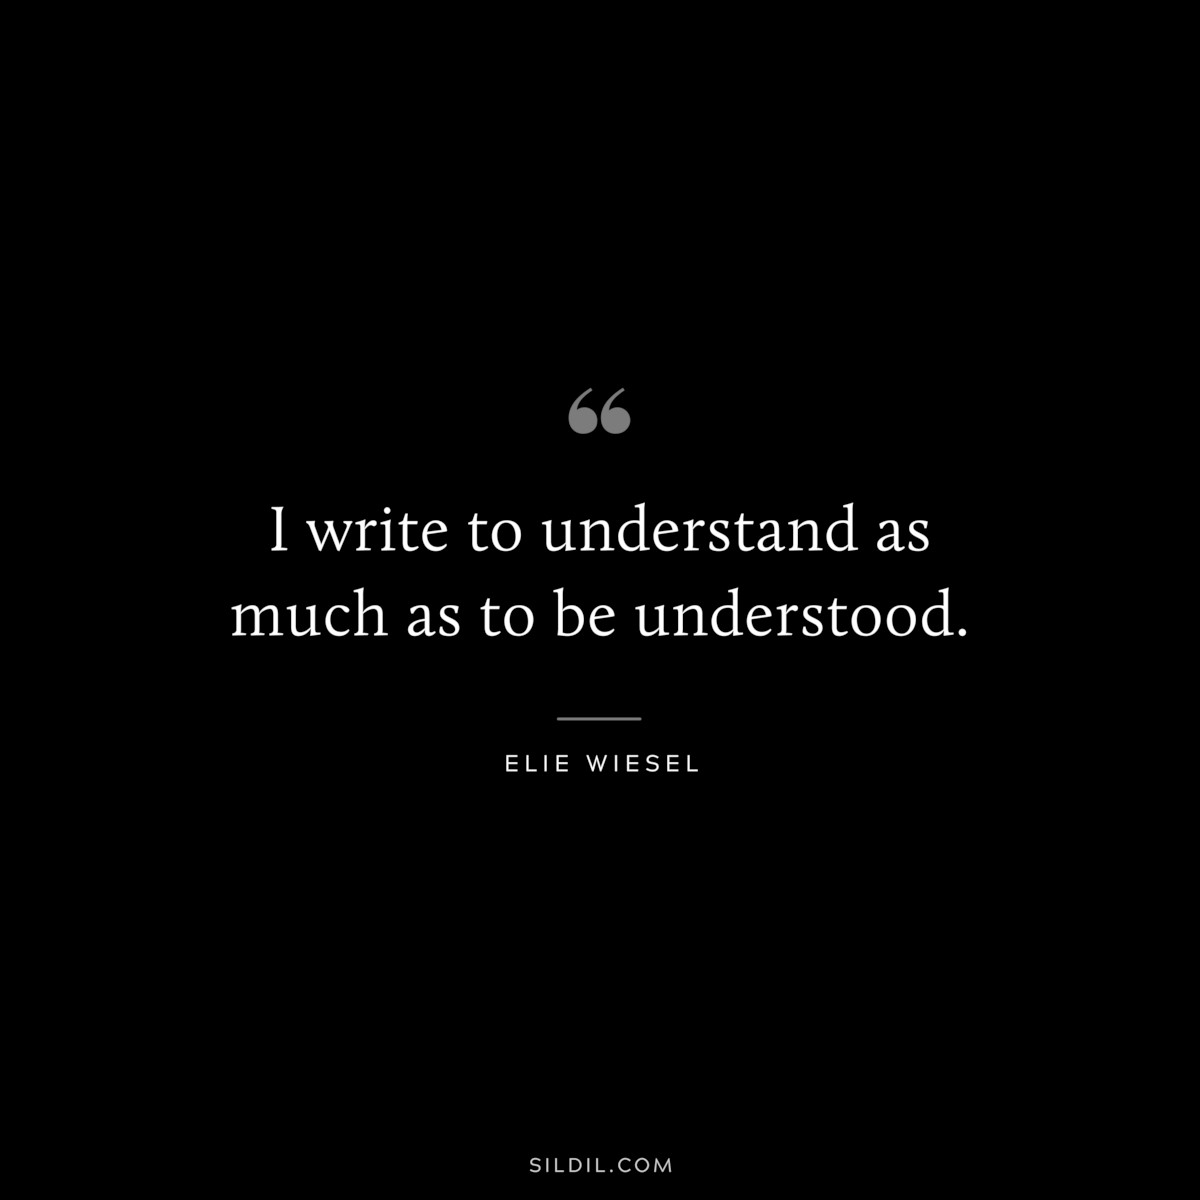 I write to understand as much as to be understood. ― Elie Wiesel